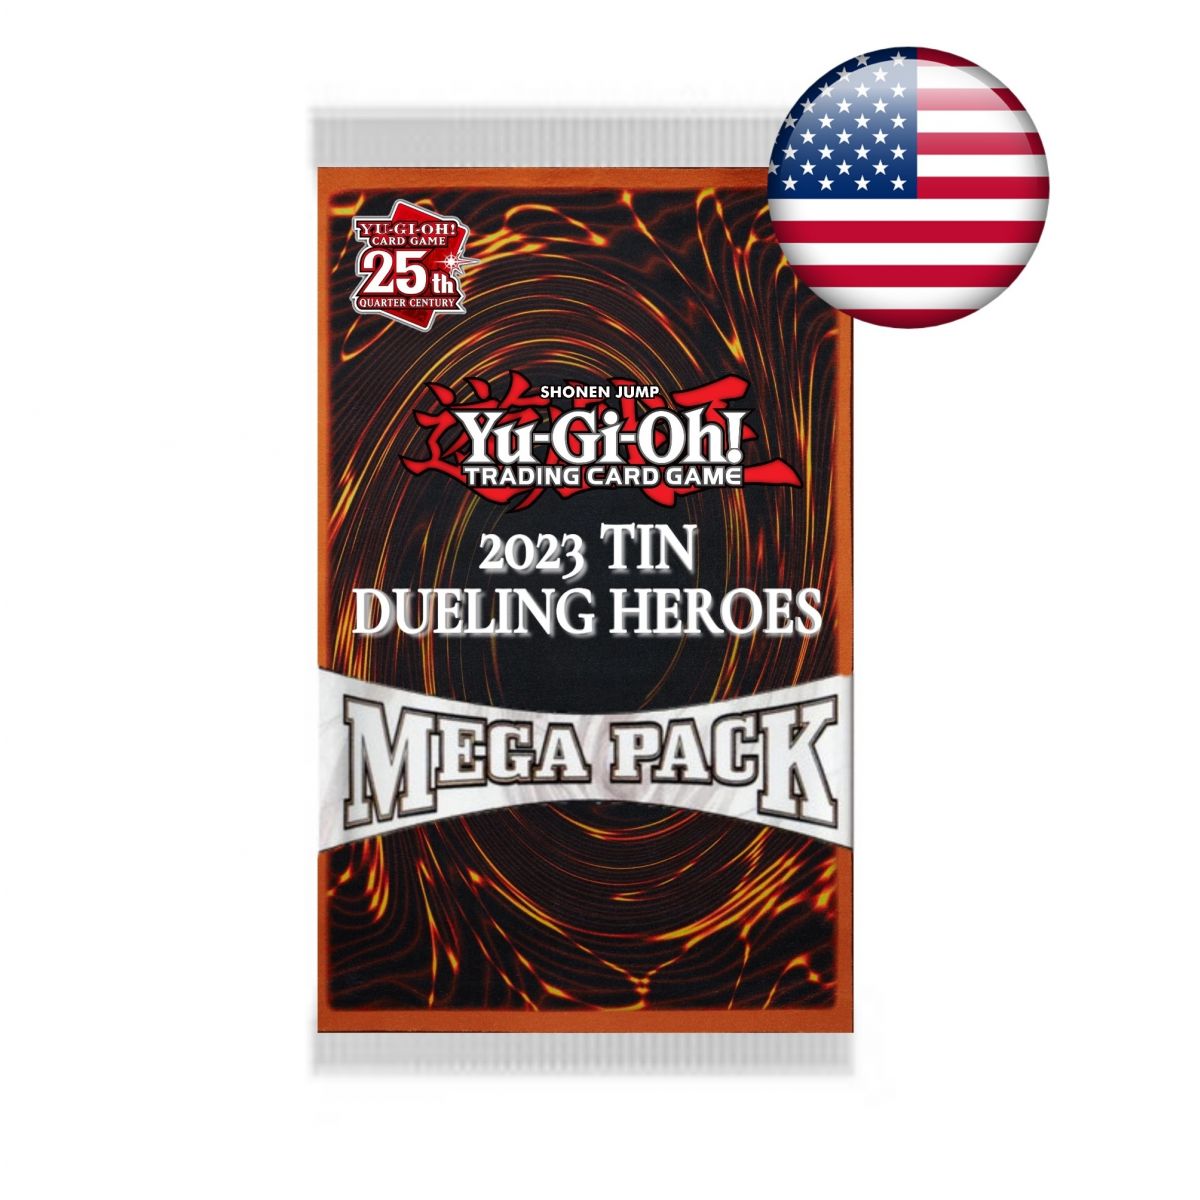 Yu-Gi-Oh! - Booster Mega Pack Tin Box 25ème Anniversaire 2023 - Dueling Heroes - US